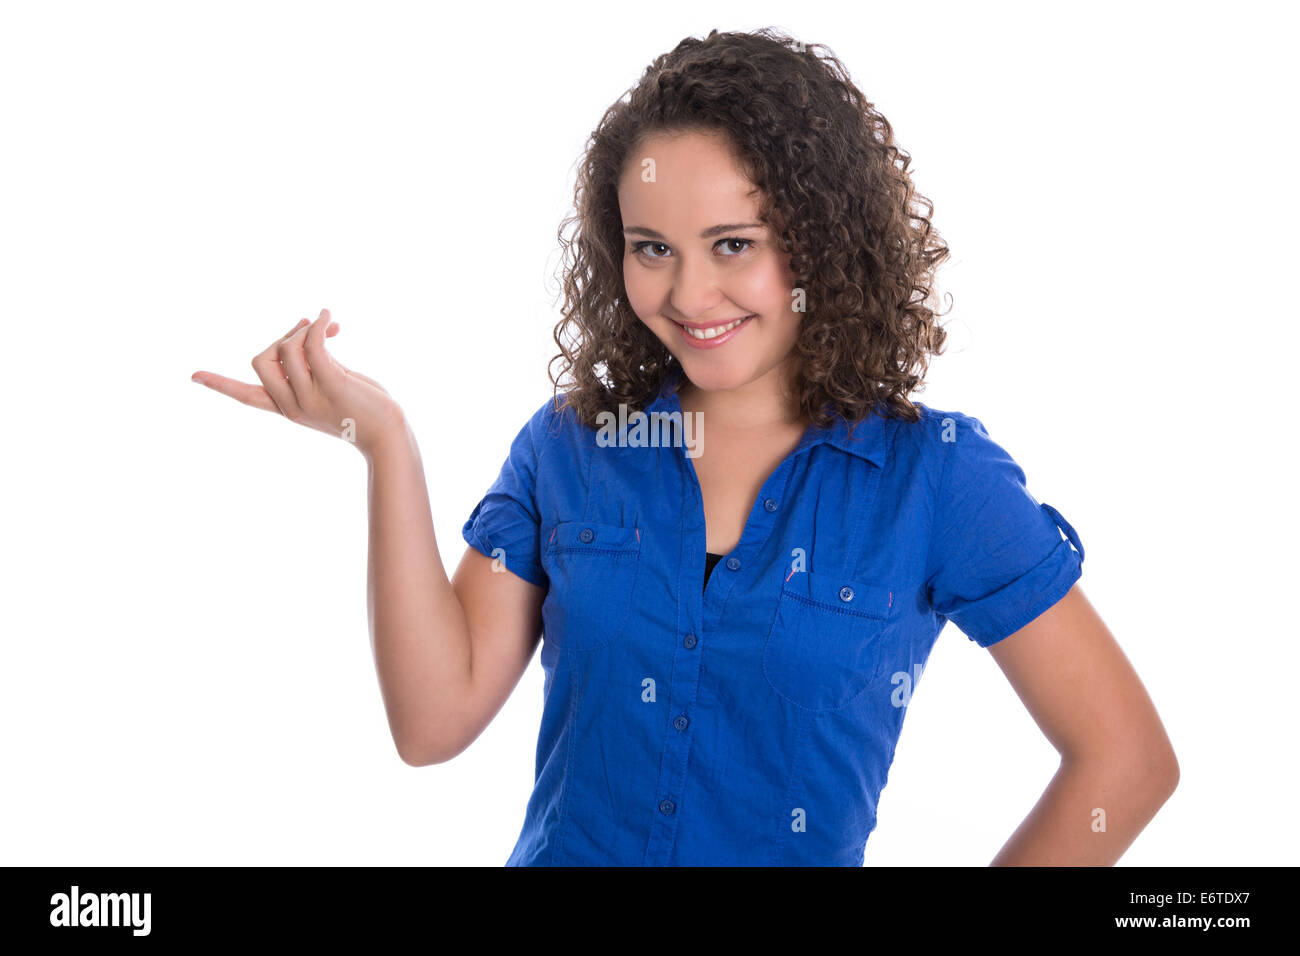 Presentation concept: isolated young woman in blue blouse showing something with forefinger. Stock Photo